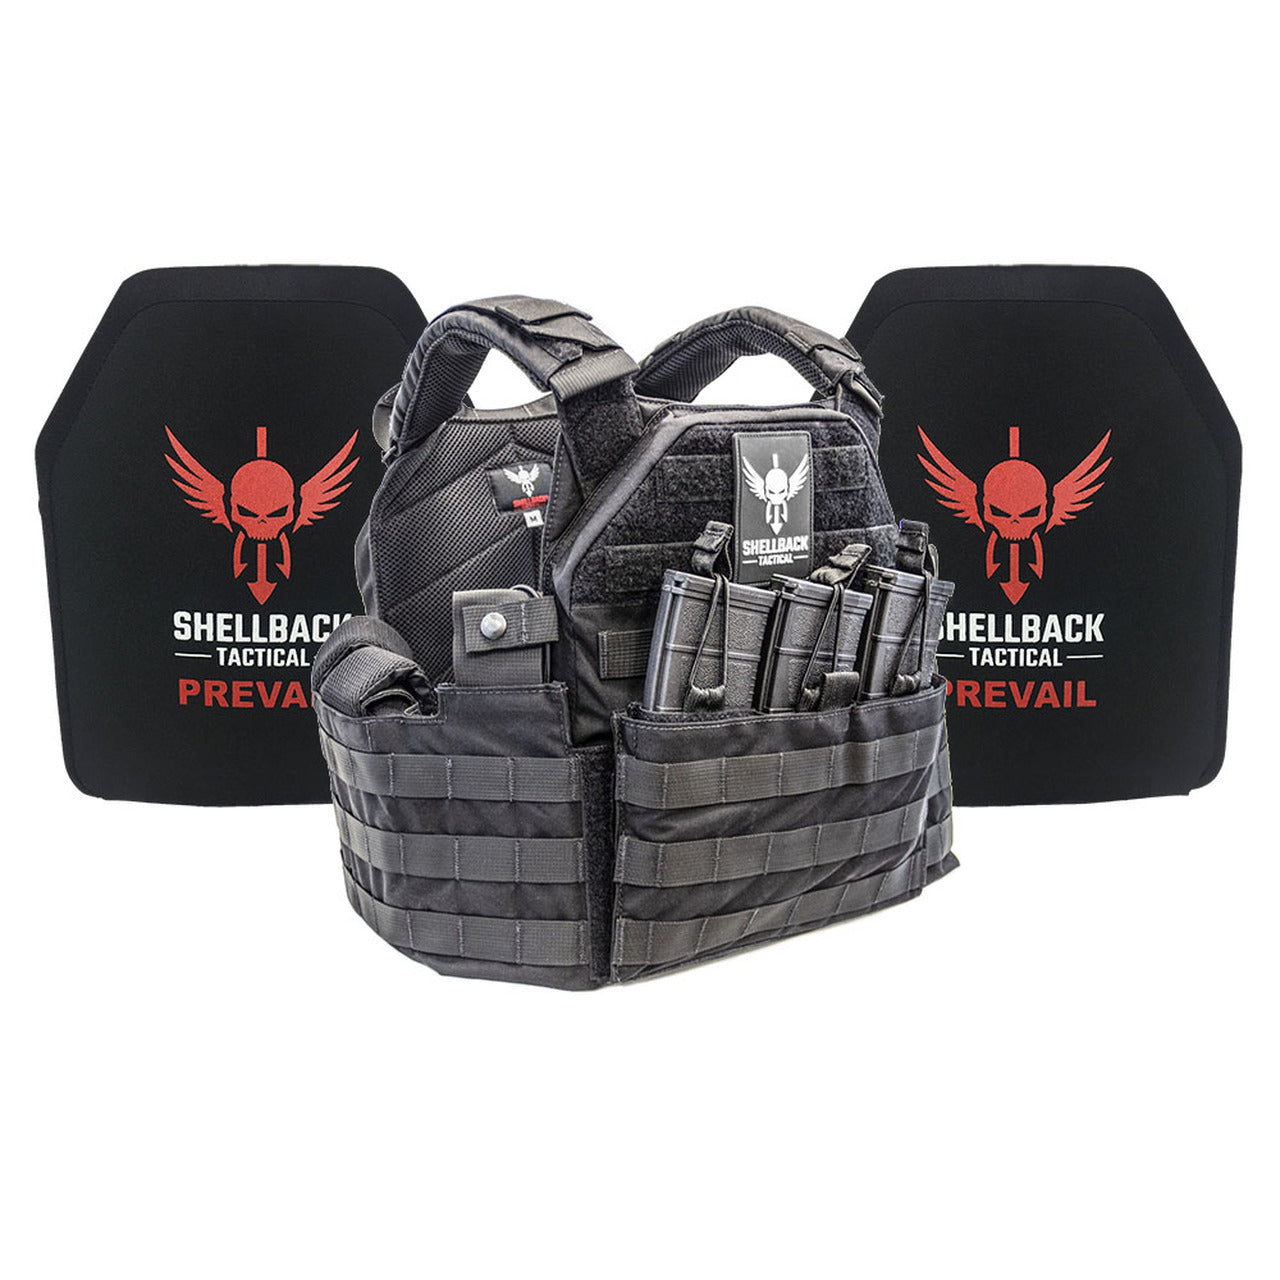 A Shellback Tactical SF Lightweight Armor System with Level III+ H3101 Plates plate carrier with a holster on it.